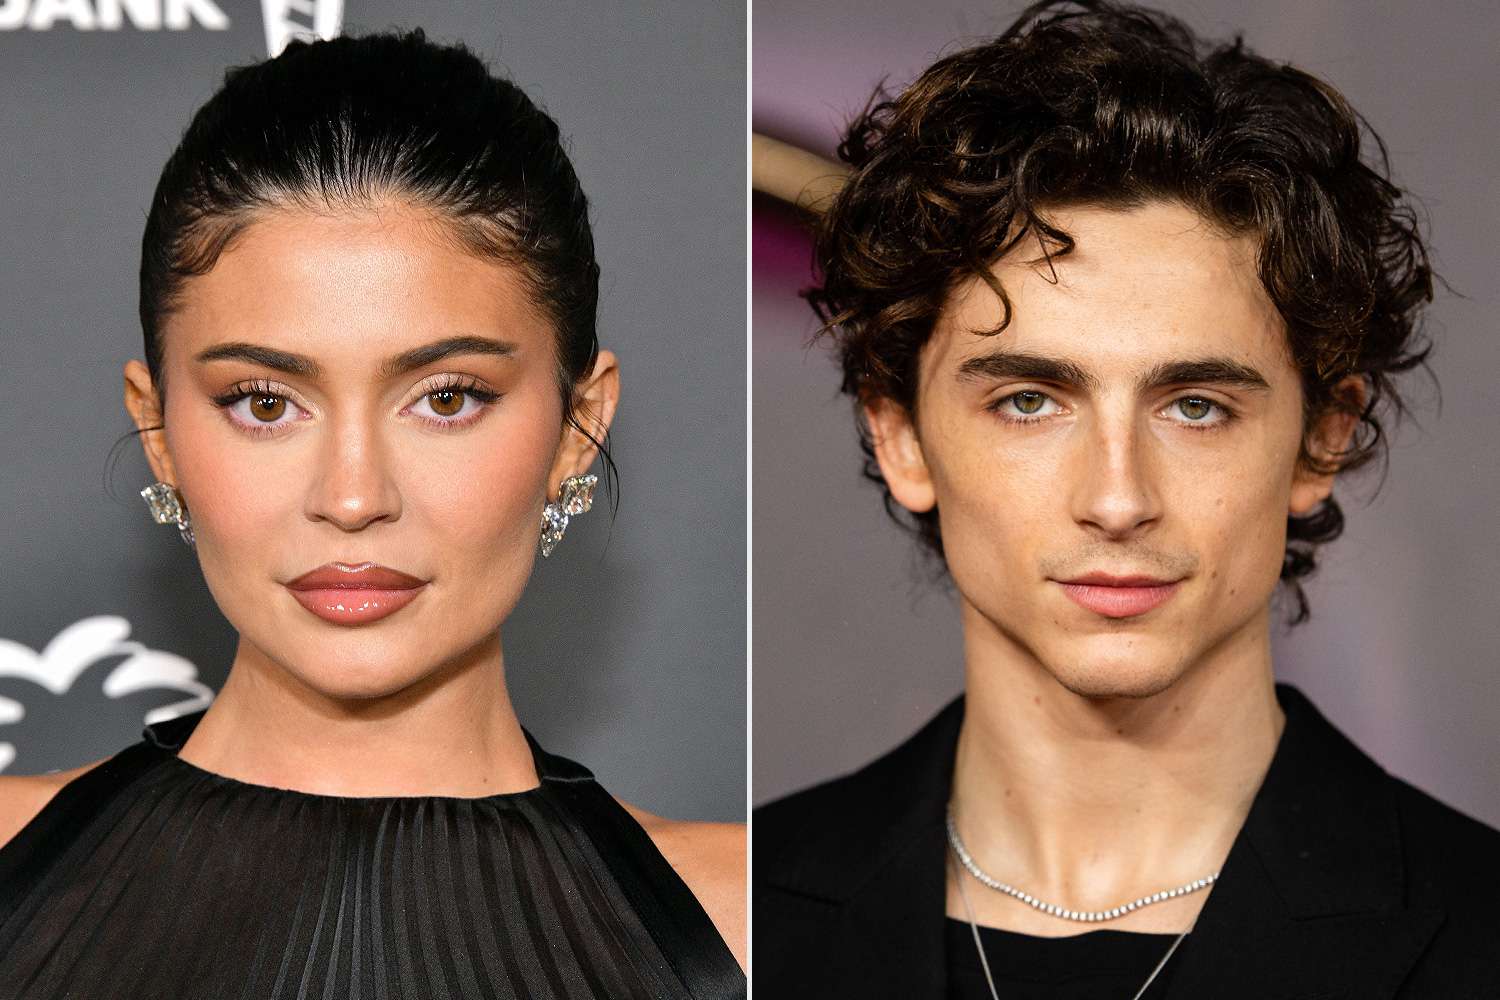 Kylie Jenner And Timothée Chalamet Turn Heads At Fashion Event